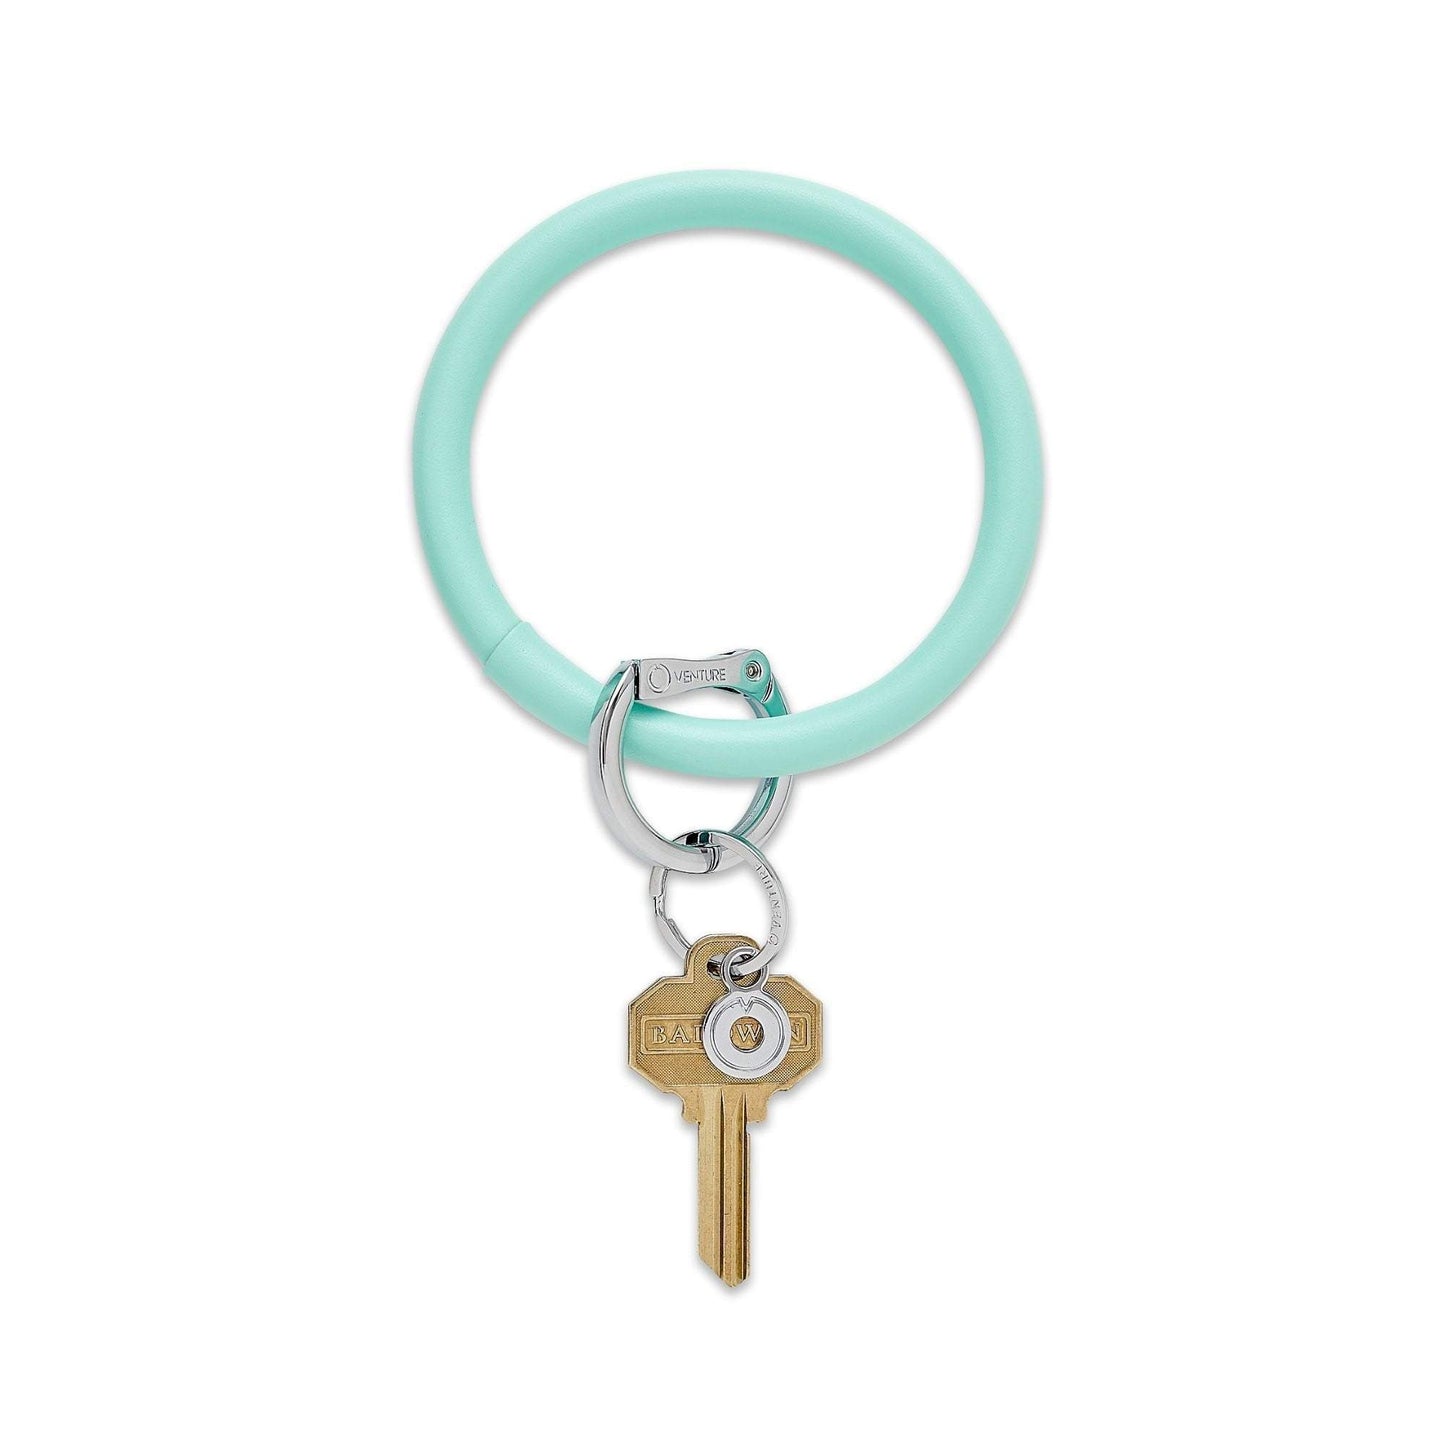 Mint green leather big O key ring with silver locking clasp